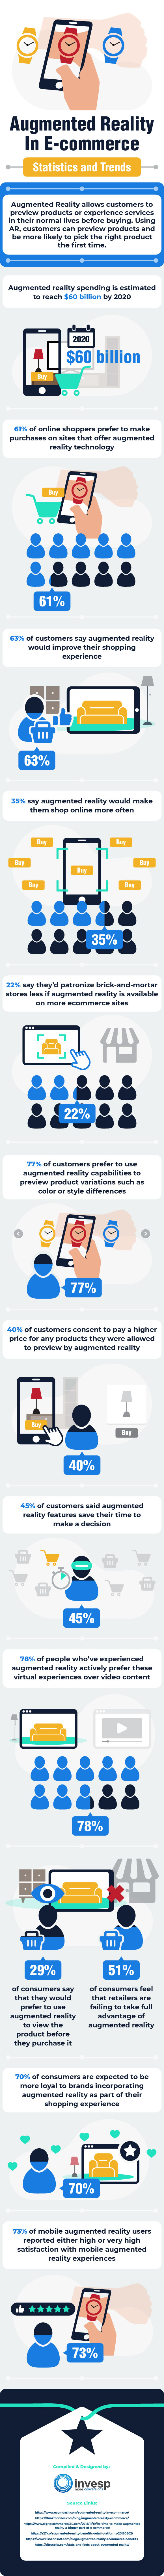 Augmented Reality in E-commerce – Statistics and Trends